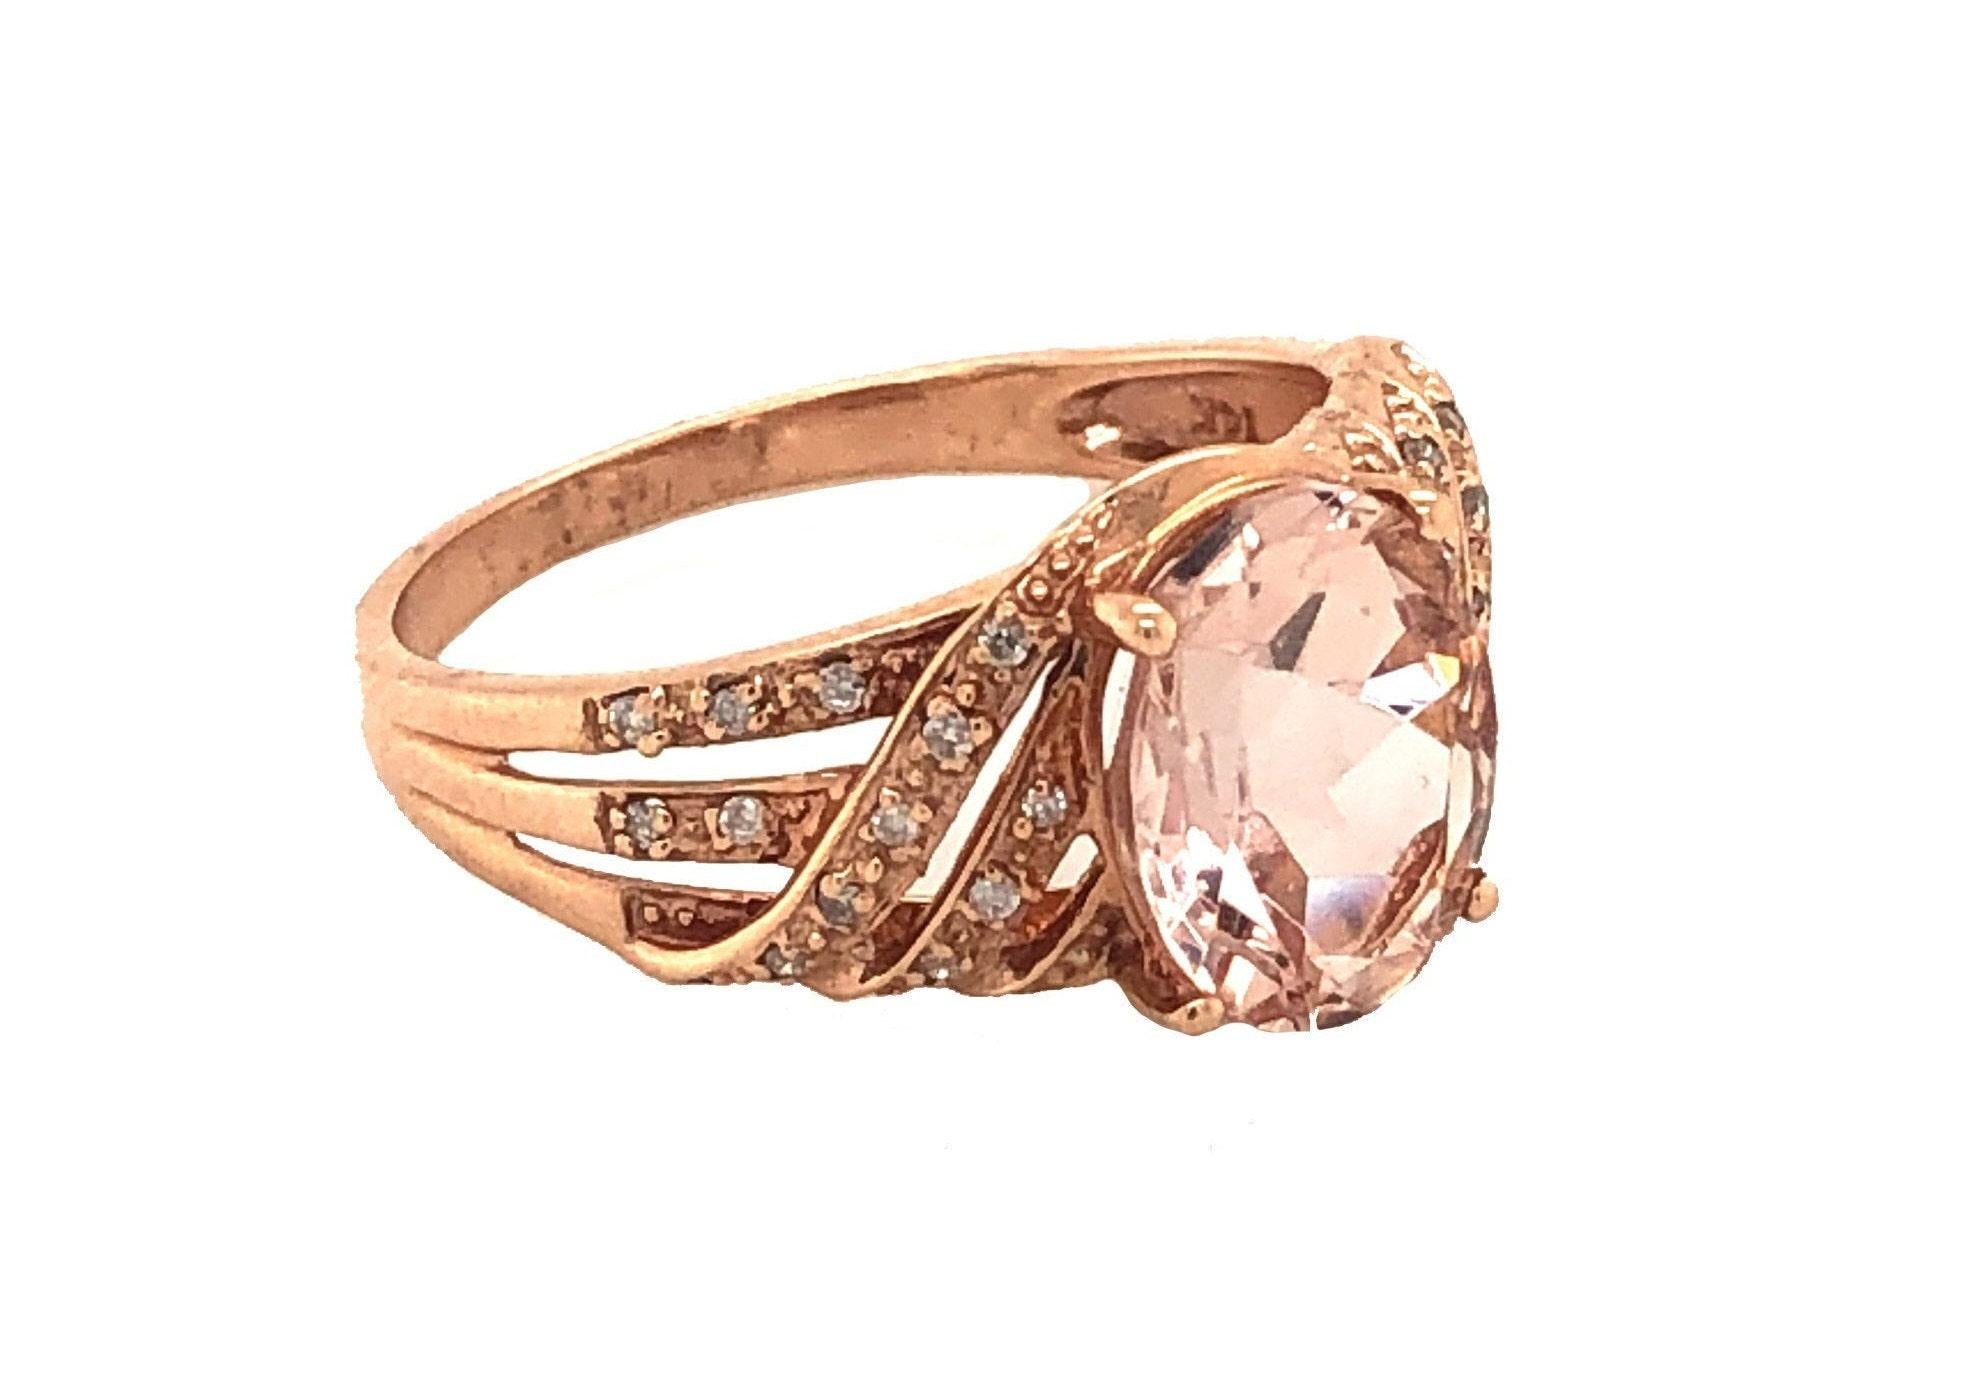 This is a marvelous natural morganite and diamond ring set in solid 14K rose gold. The natural Oval 2.24 CT Morganite (10x8MM) has an excellent peachy pink color ring set on top of a gorgeous diamond encrusted shank. The ring is stamped 14K and is a